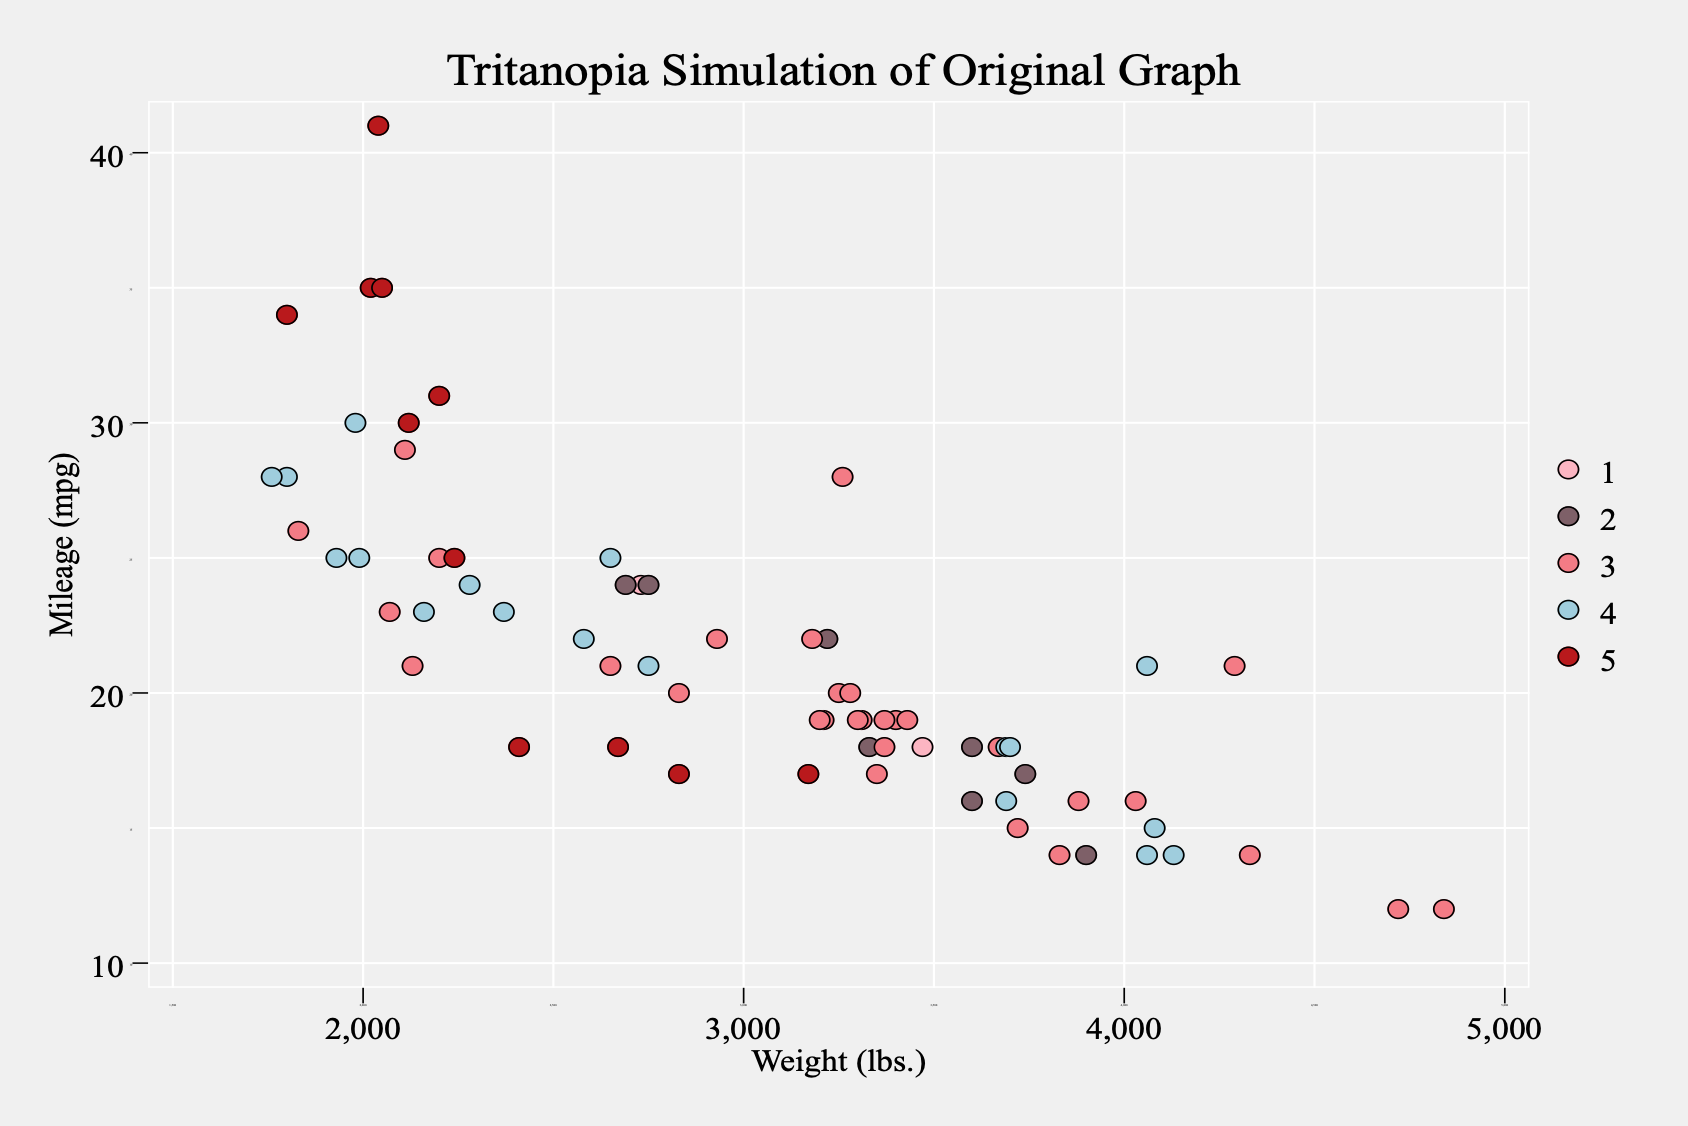 Example of same Stata graph using Kelly's contrasting colors with colors simulated to show tritanopia.